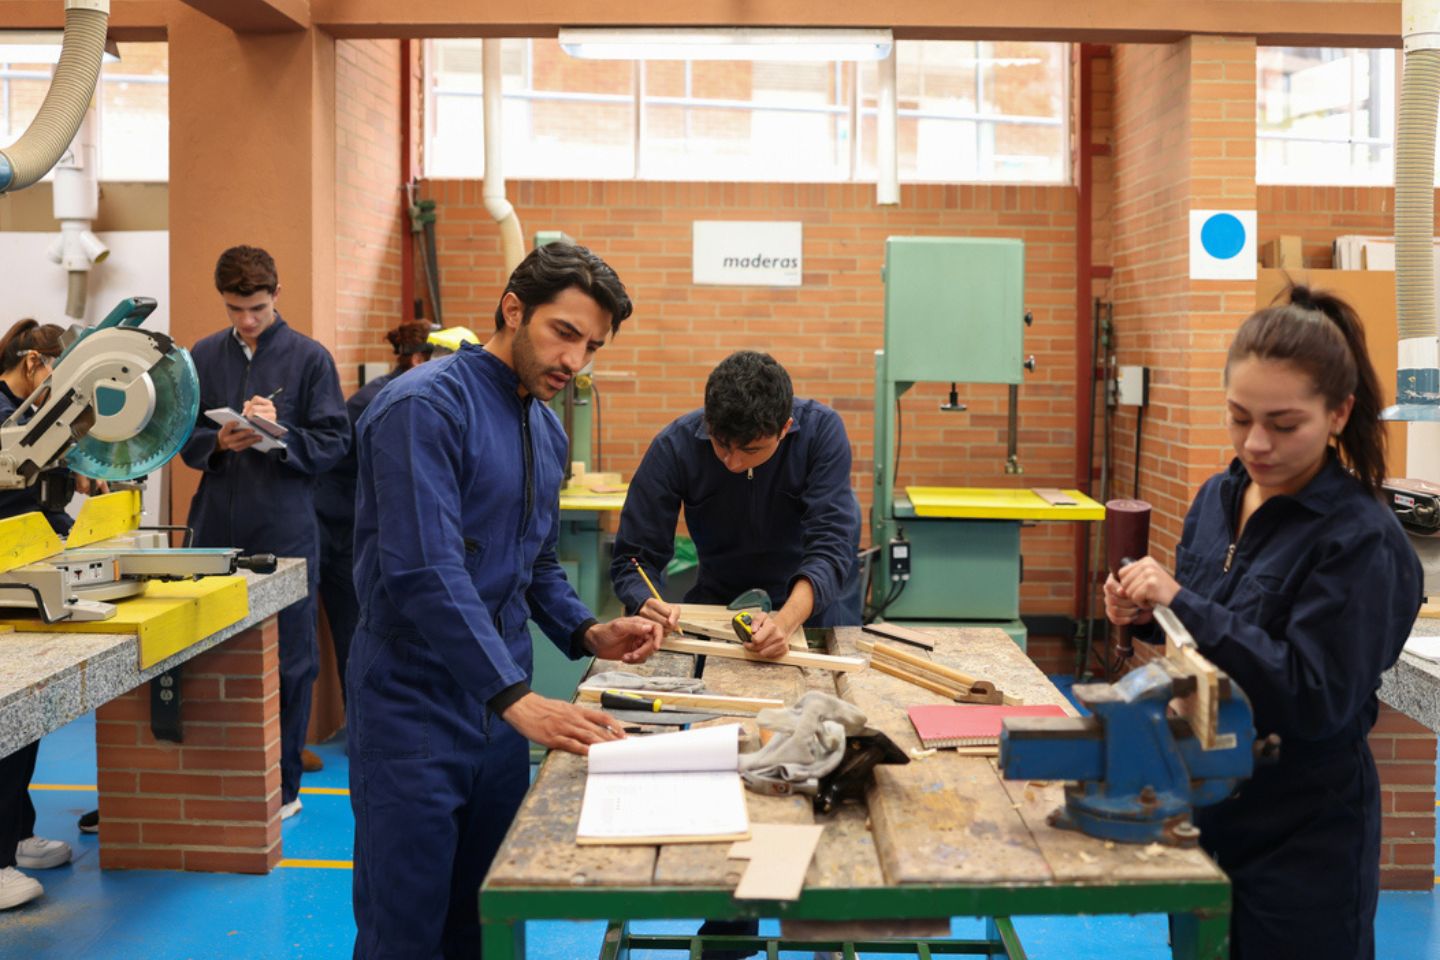 People learning construction on a work bench